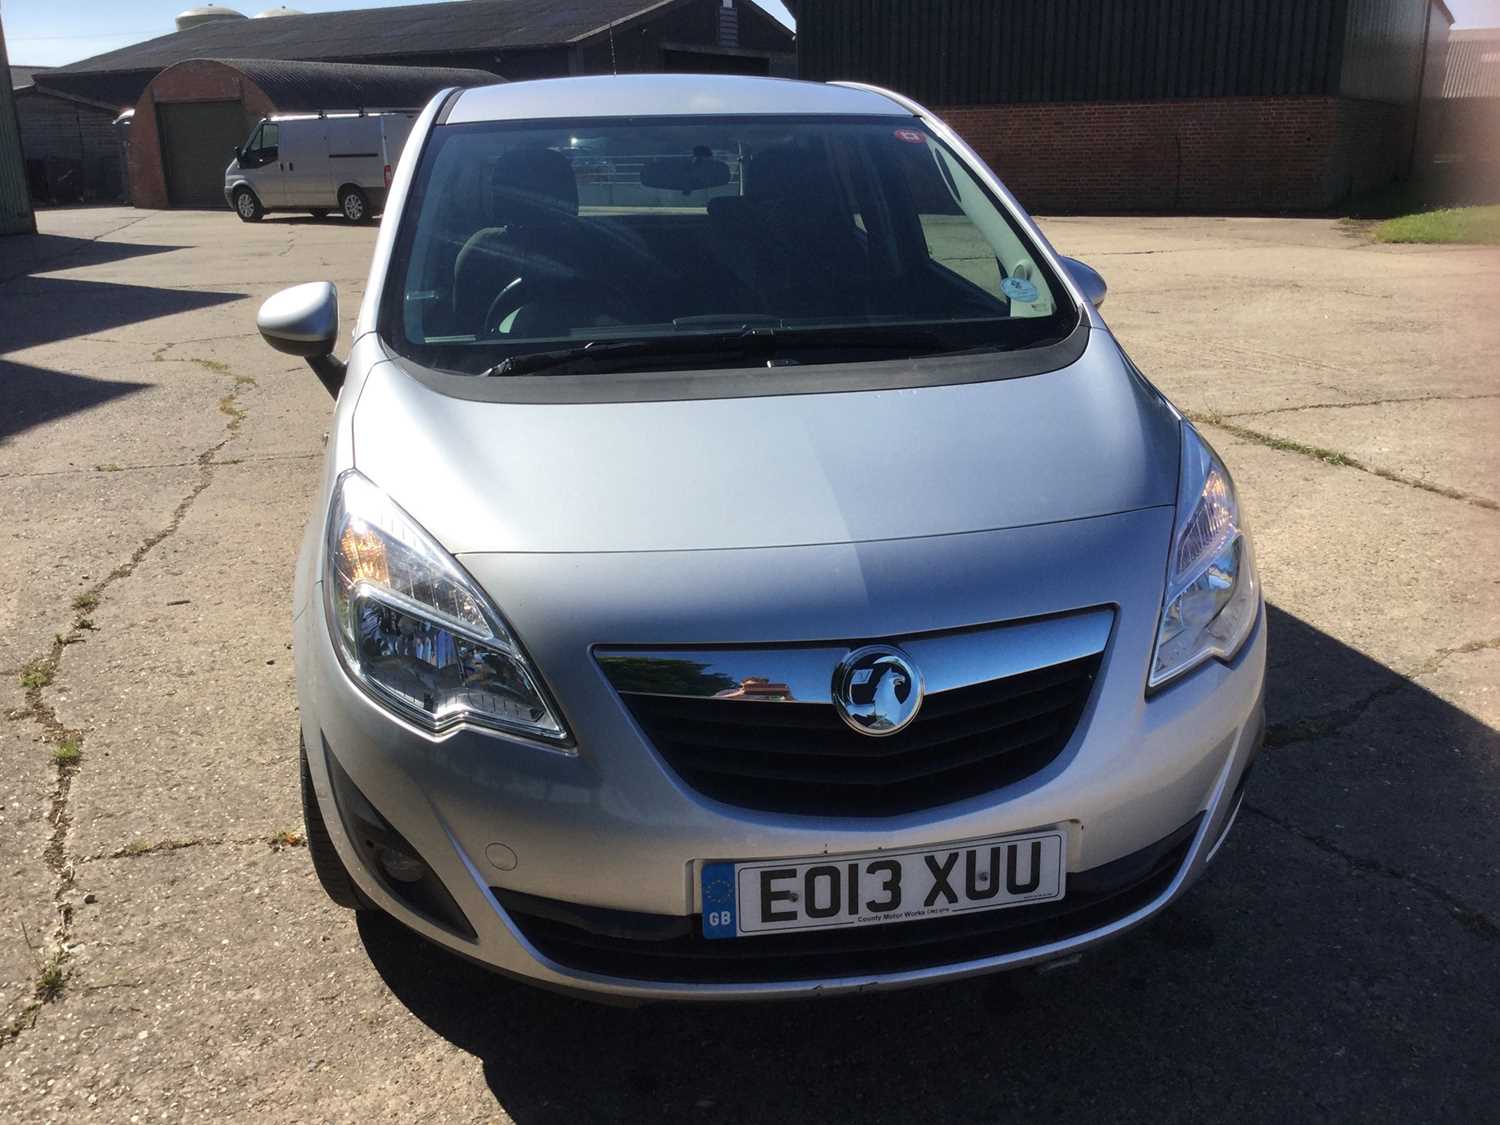 2013 Vauxhall Meriva 1.4i 16v Energy 5dr, manual, Reg. No. EO13 XUU, finished in silver. - Image 2 of 16